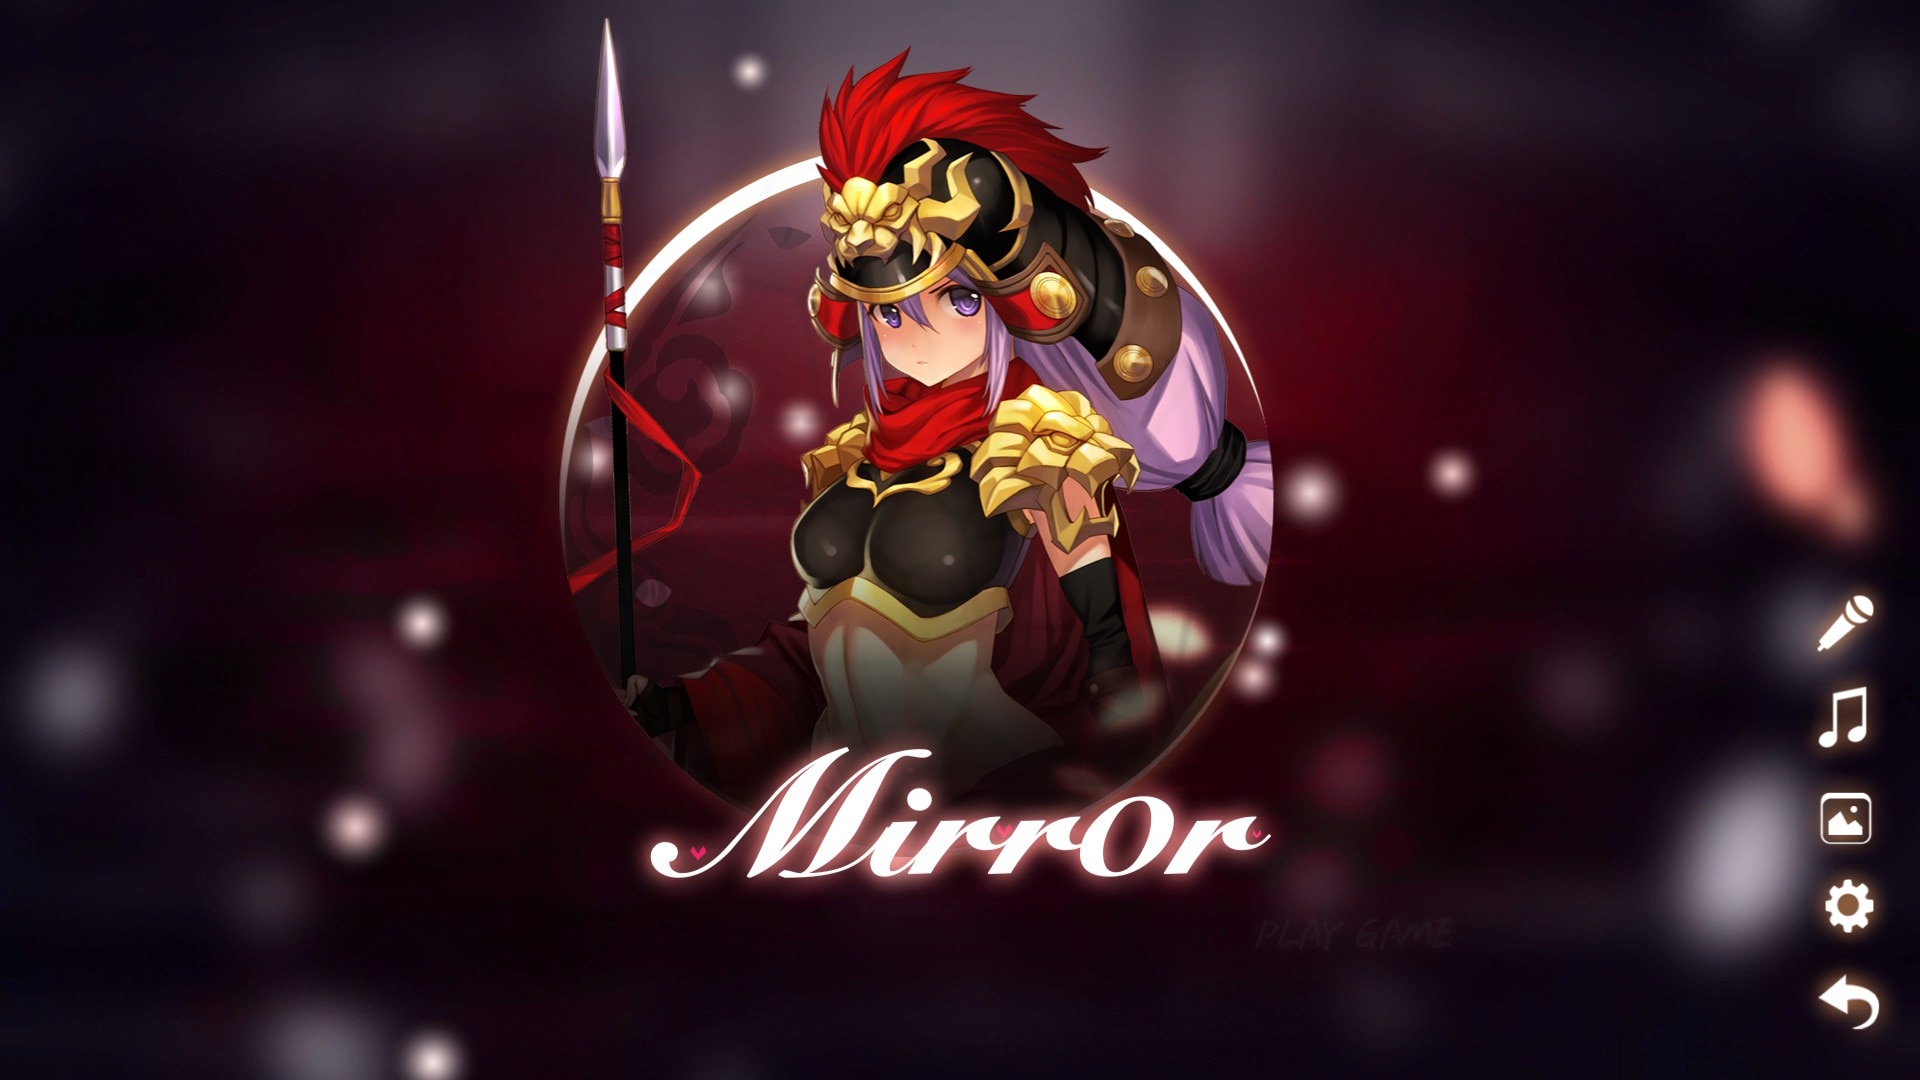 Mirror - Full 18+ uncensored patch Working 2020.